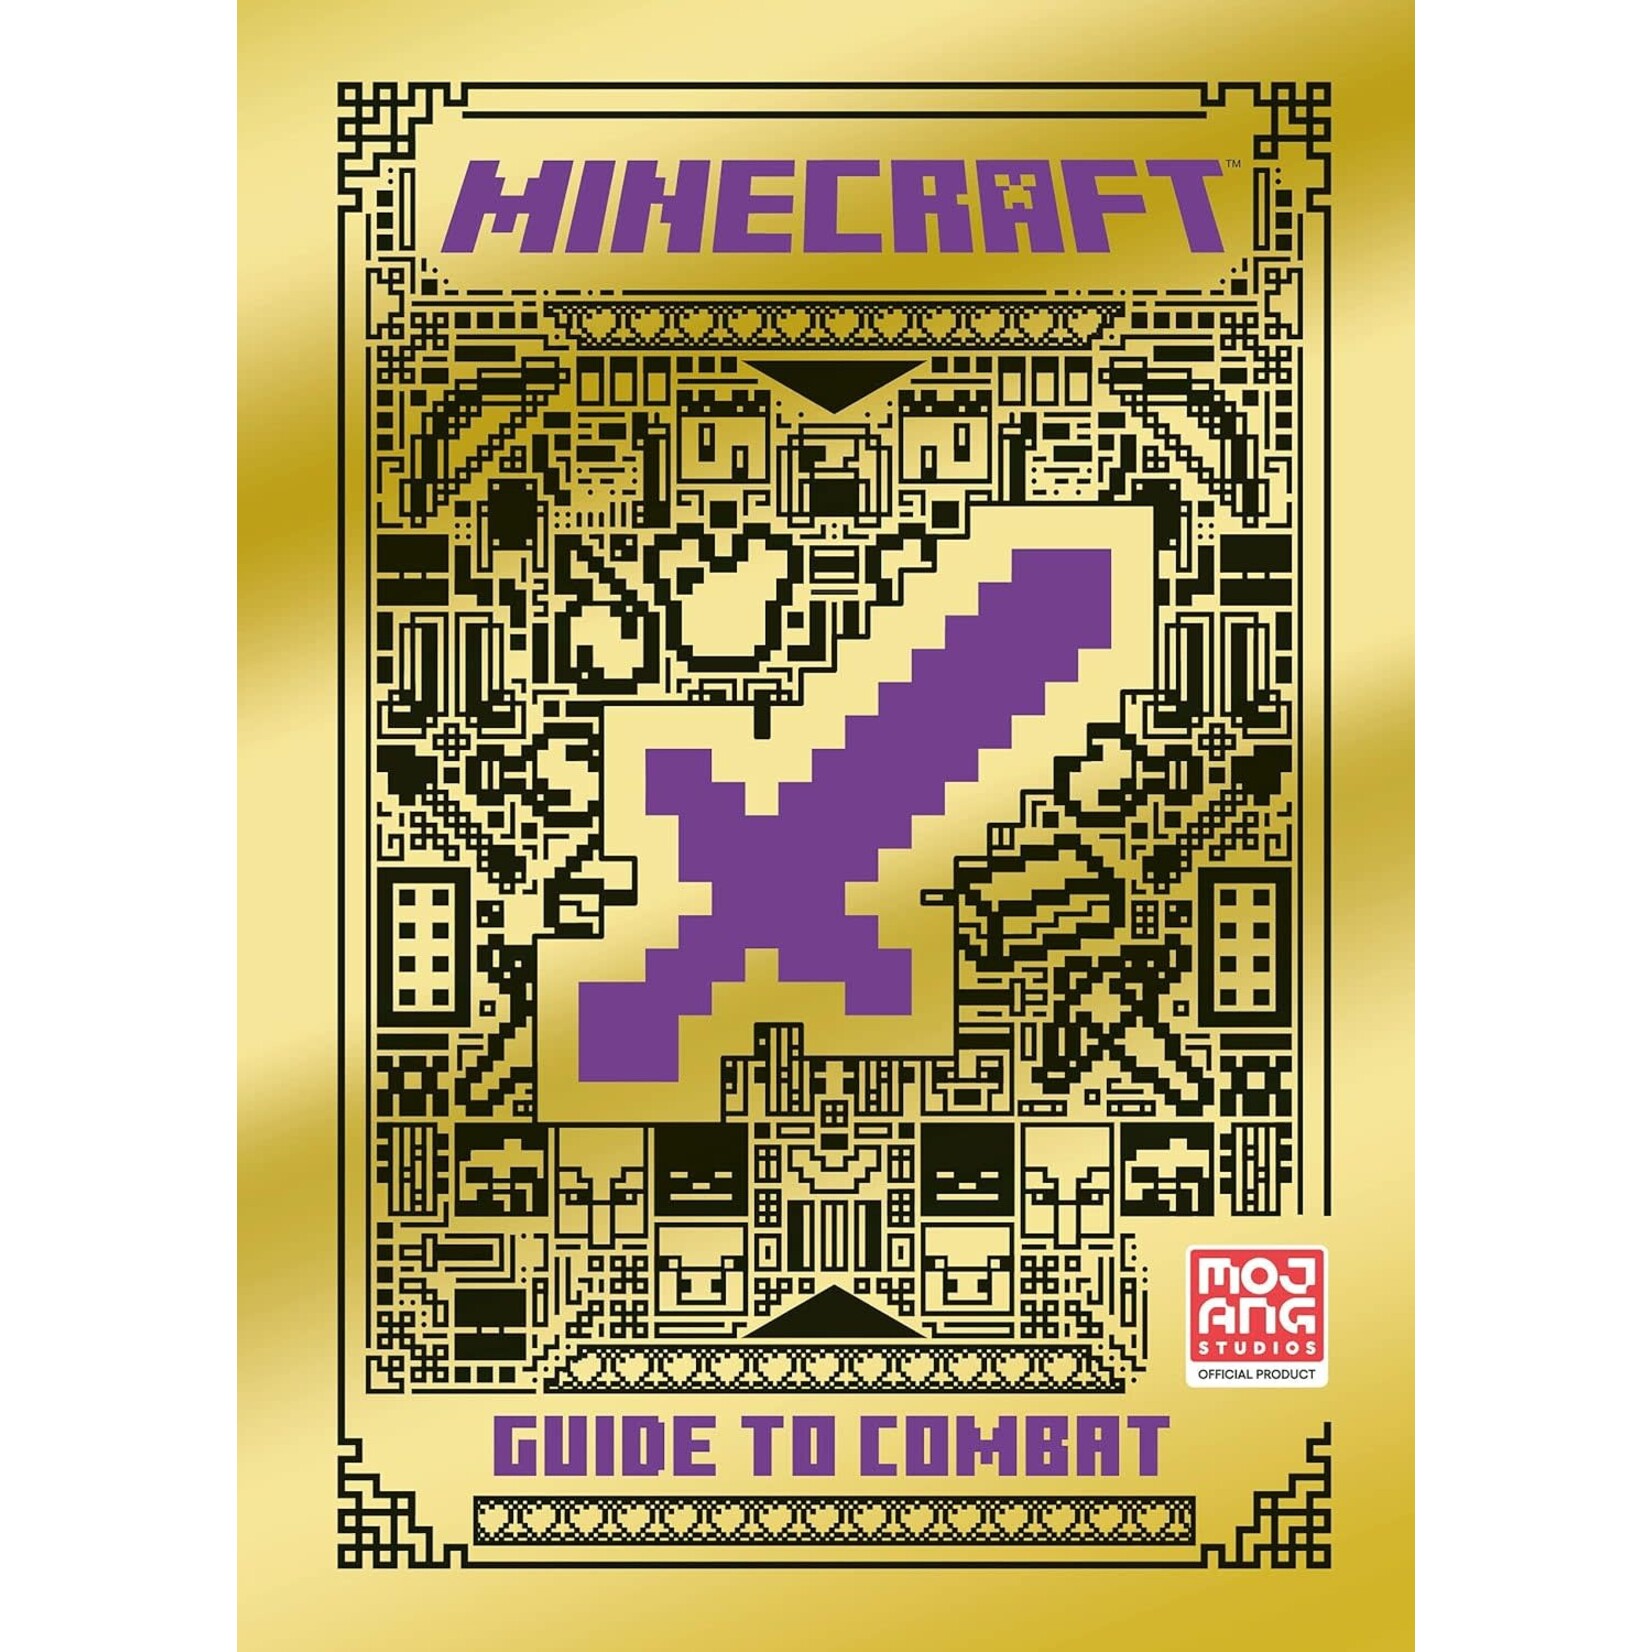 Minecraft: Guide to Combat